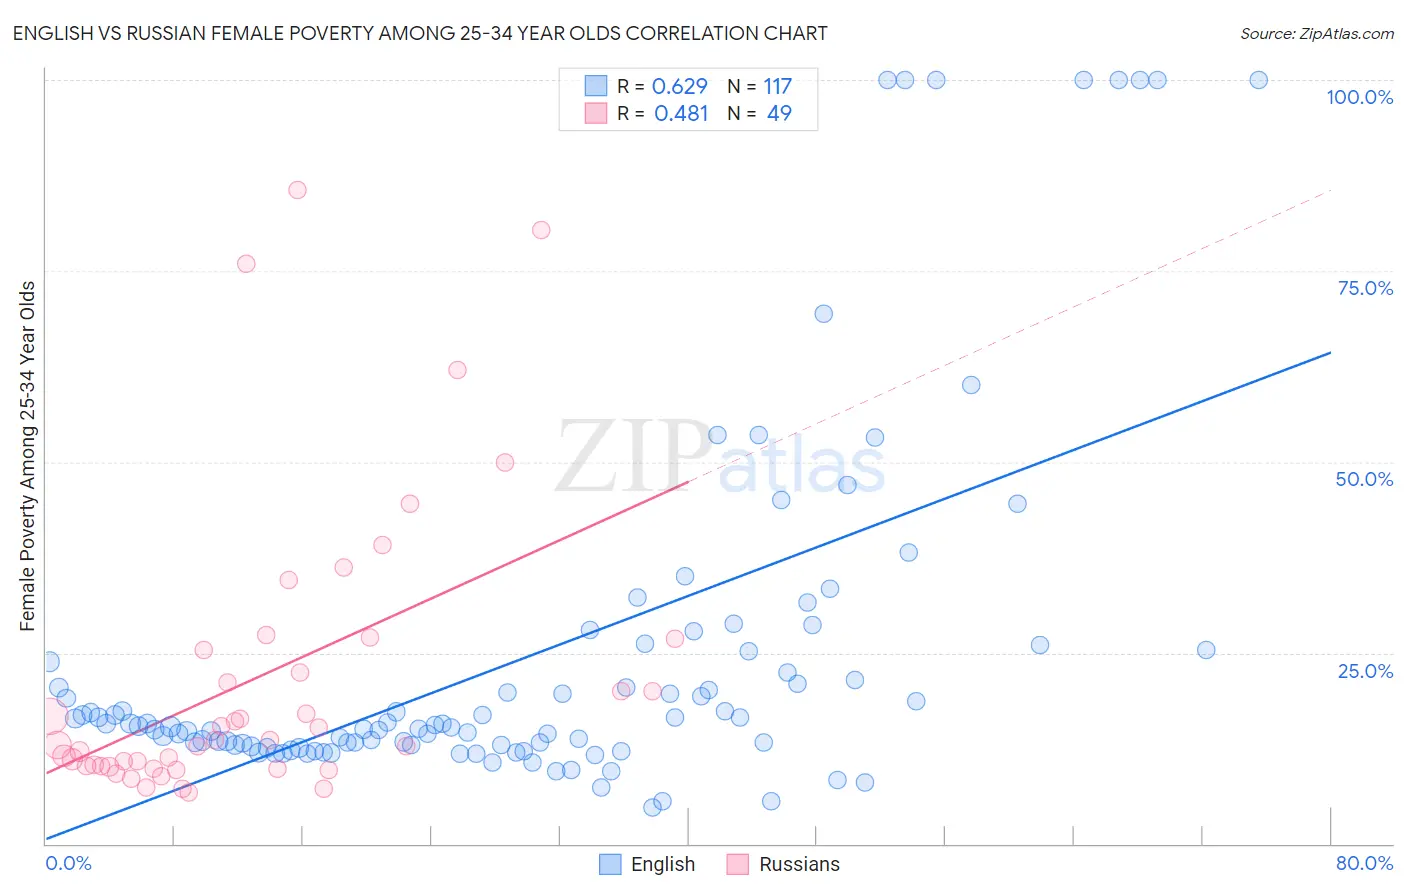 English vs Russian Female Poverty Among 25-34 Year Olds